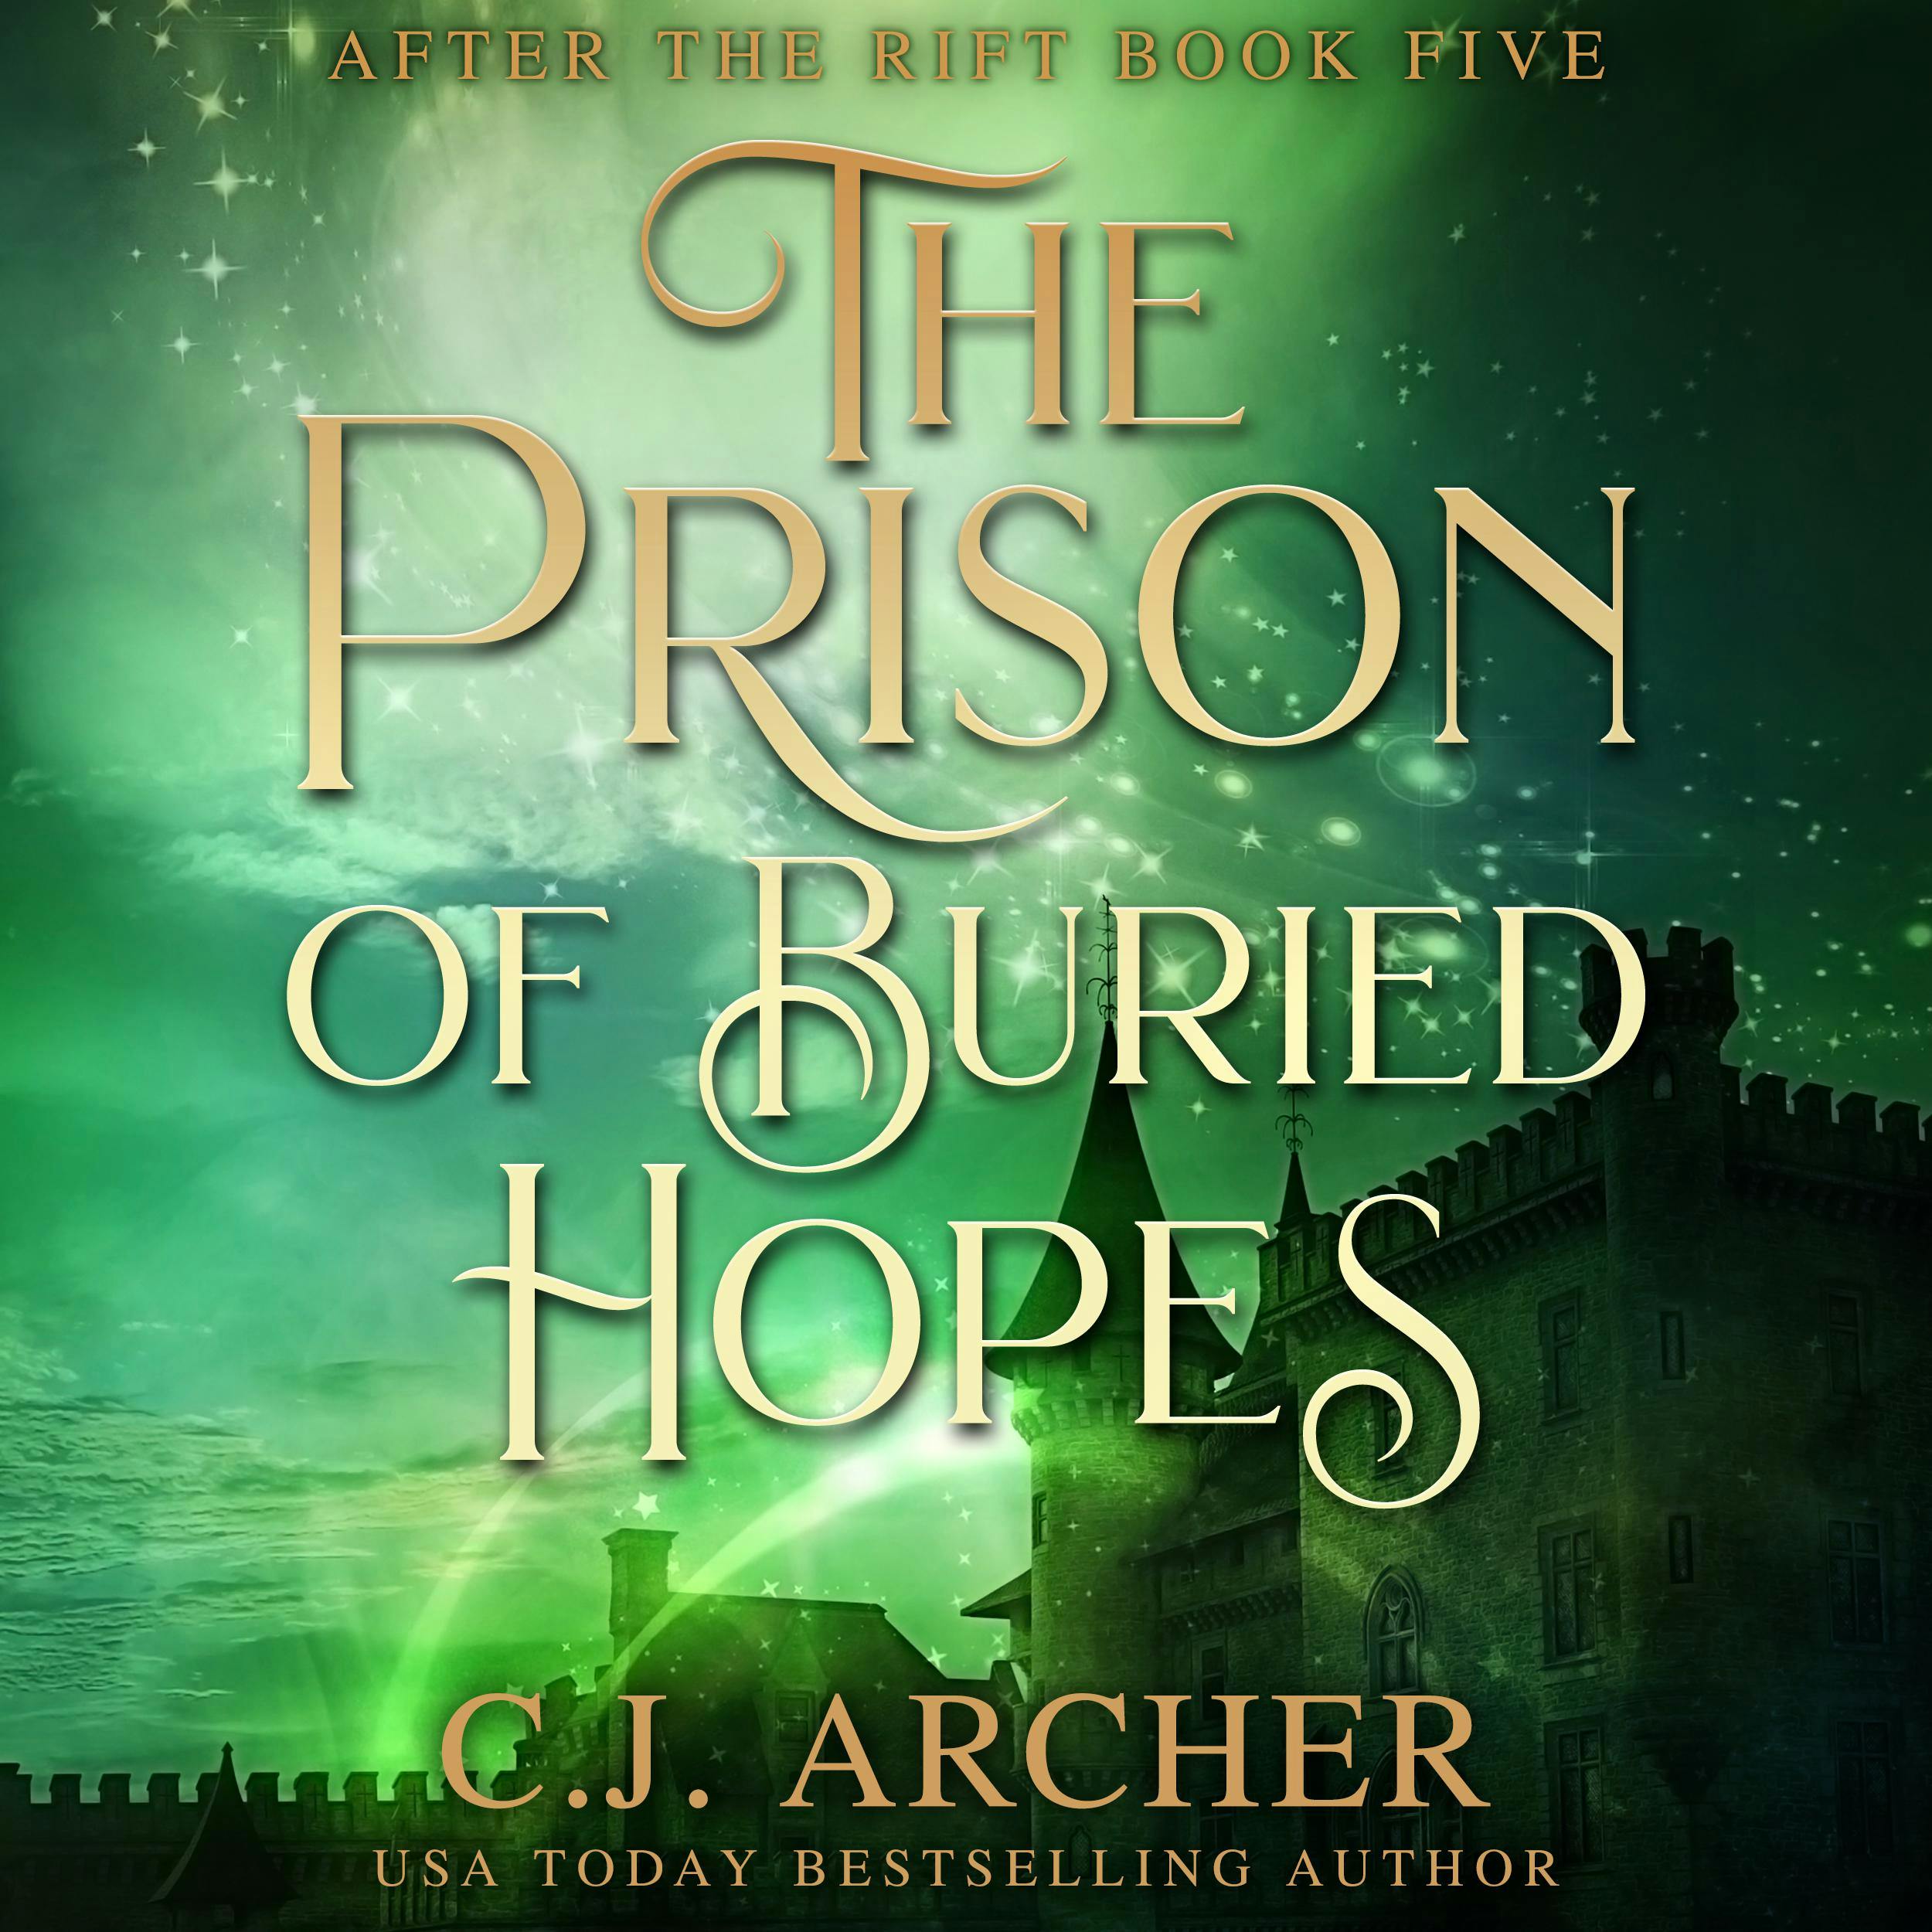 The Prison of Buried Hopes: After The Rift, book 5 - C.J. Archer